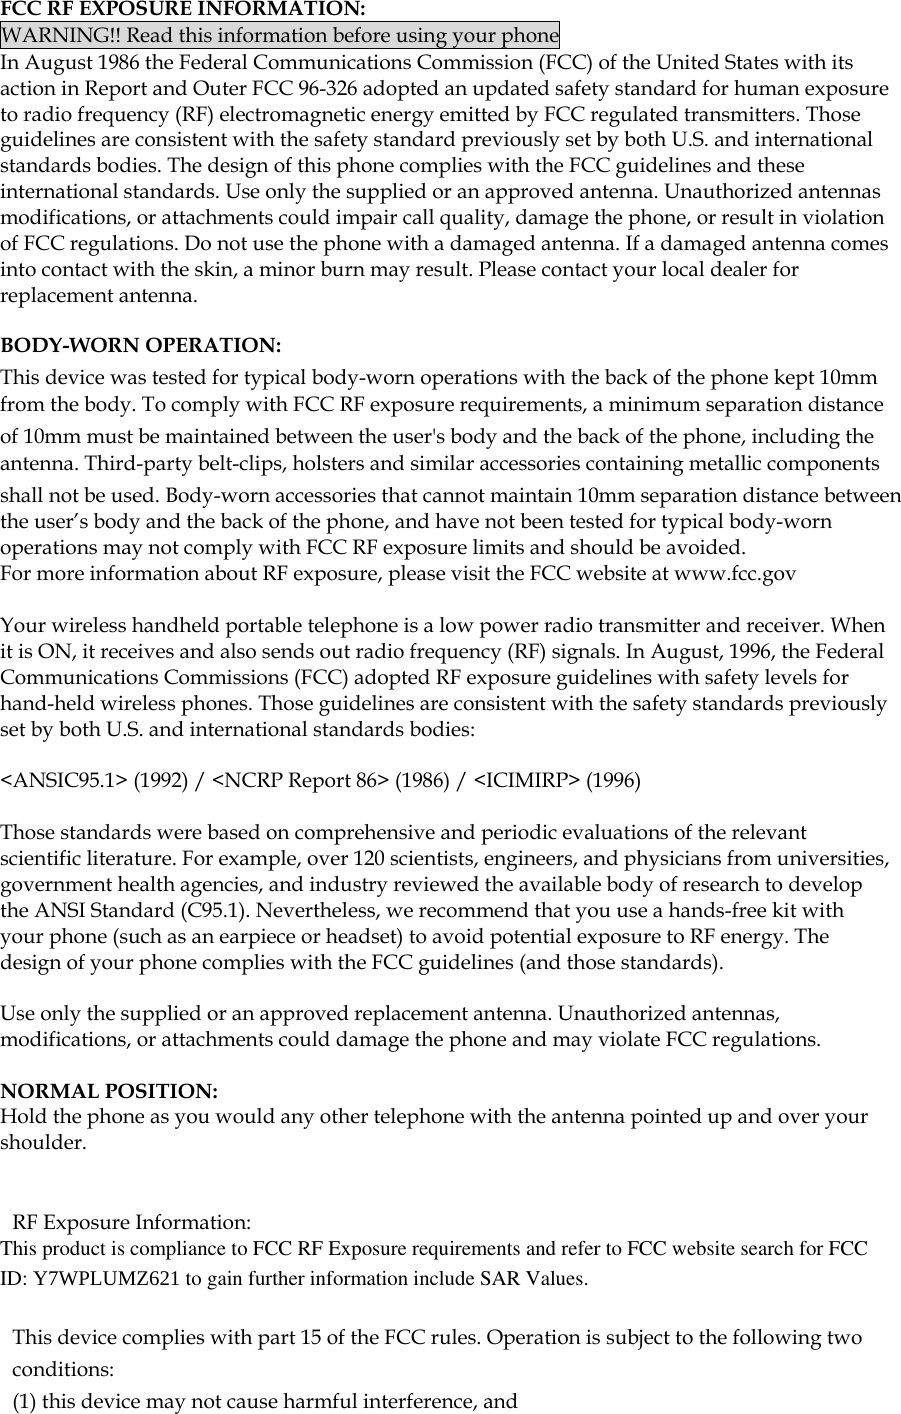  FCC RF EXPOSURE INFORMATION: WARNING!! Read this information before using your phone In August 1986 the Federal Communications Commission (FCC) of the United States with its action in Report and Outer FCC 96-326 adopted an updated safety standard for human exposure to radio frequency (RF) electromagnetic energy emitted by FCC regulated transmitters. Those guidelines are consistent with the safety standard previously set by both U.S. and international standards bodies. The design of this phone complies with the FCC guidelines and these international standards. Use only the supplied or an approved antenna. Unauthorized antennas modifications, or attachments could impair call quality, damage the phone, or result in violation of FCC regulations. Do not use the phone with a damaged antenna. If a damaged antenna comes into contact with the skin, a minor burn may result. Please contact your local dealer for replacement antenna.  BODY-WORN OPERATION: This device was tested for typical body-worn operations with the back of the phone kept 10mm from the body. To comply with FCC RF exposure requirements, a minimum separation distance of 10mm must be maintained between the user&apos;s body and the back of the phone, including the antenna. Third-party belt-clips, holsters and similar accessories containing metallic components shall not be used. Body-worn accessories that cannot maintain 10mm separation distance between the user’s body and the back of the phone, and have not been tested for typical body-worn operations may not comply with FCC RF exposure limits and should be avoided. For more information about RF exposure, please visit the FCC website at www.fcc.gov  Your wireless handheld portable telephone is a low power radio transmitter and receiver. When it is ON, it receives and also sends out radio frequency (RF) signals. In August, 1996, the Federal Communications Commissions (FCC) adopted RF exposure guidelines with safety levels for hand-held wireless phones. Those guidelines are consistent with the safety standards previously set by both U.S. and international standards bodies:  &lt;ANSIC95.1&gt; (1992) / &lt;NCRP Report 86&gt; (1986) / &lt;ICIMIRP&gt; (1996)  Those standards were based on comprehensive and periodic evaluations of the relevant scientific literature. For example, over 120 scientists, engineers, and physicians from universities, government health agencies, and industry reviewed the available body of research to develop the ANSI Standard (C95.1). Nevertheless, we recommend that you use a hands-free kit with your phone (such as an earpiece or headset) to avoid potential exposure to RF energy. The design of your phone complies with the FCC guidelines (and those standards).  Use only the supplied or an approved replacement antenna. Unauthorized antennas, modifications, or attachments could damage the phone and may violate FCC regulations.   NORMAL POSITION:  Hold the phone as you would any other telephone with the antenna pointed up and over your shoulder.   RF Exposure Information: This product is compliance to FCC RF Exposure requirements and refer to FCC website search for FCC ID: Y7WPLUMZ621 to gain further information include SAR Values.    This device complies with part 15 of the FCC rules. Operation is subject to the following two conditions: (1) this device may not cause harmful interference, and 